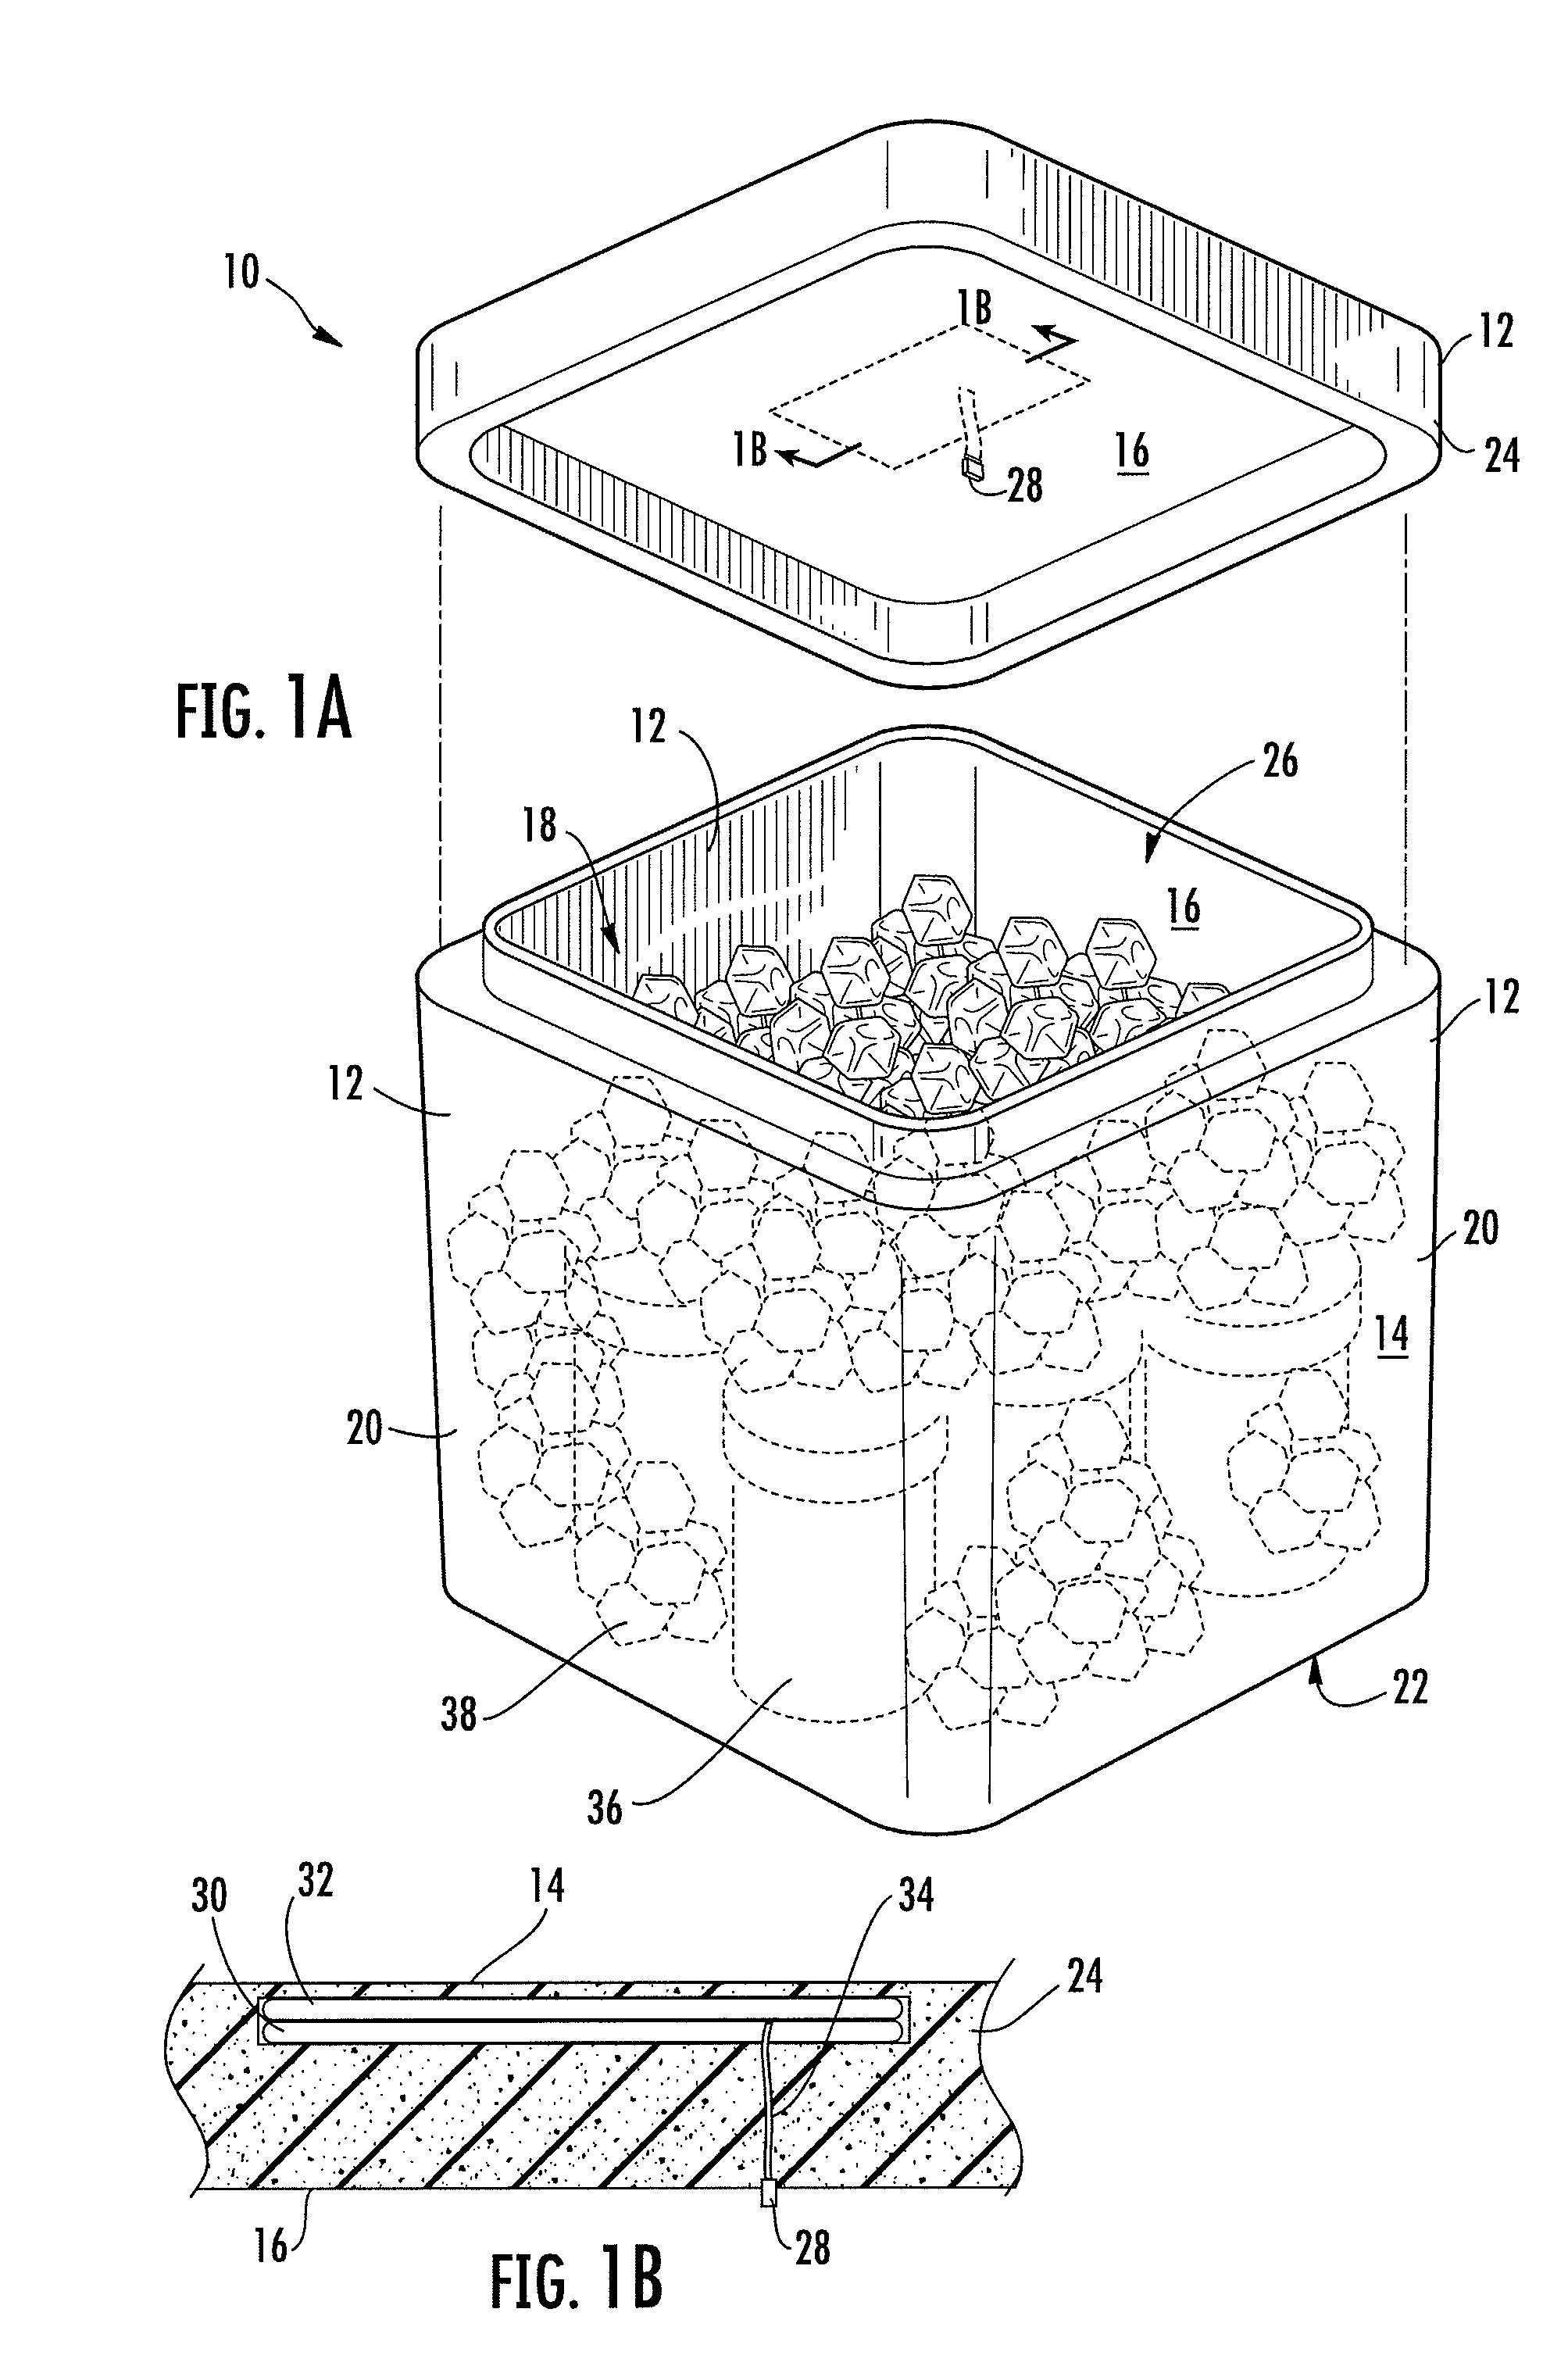 Insulated Container Having a Temperature Monitoring Device